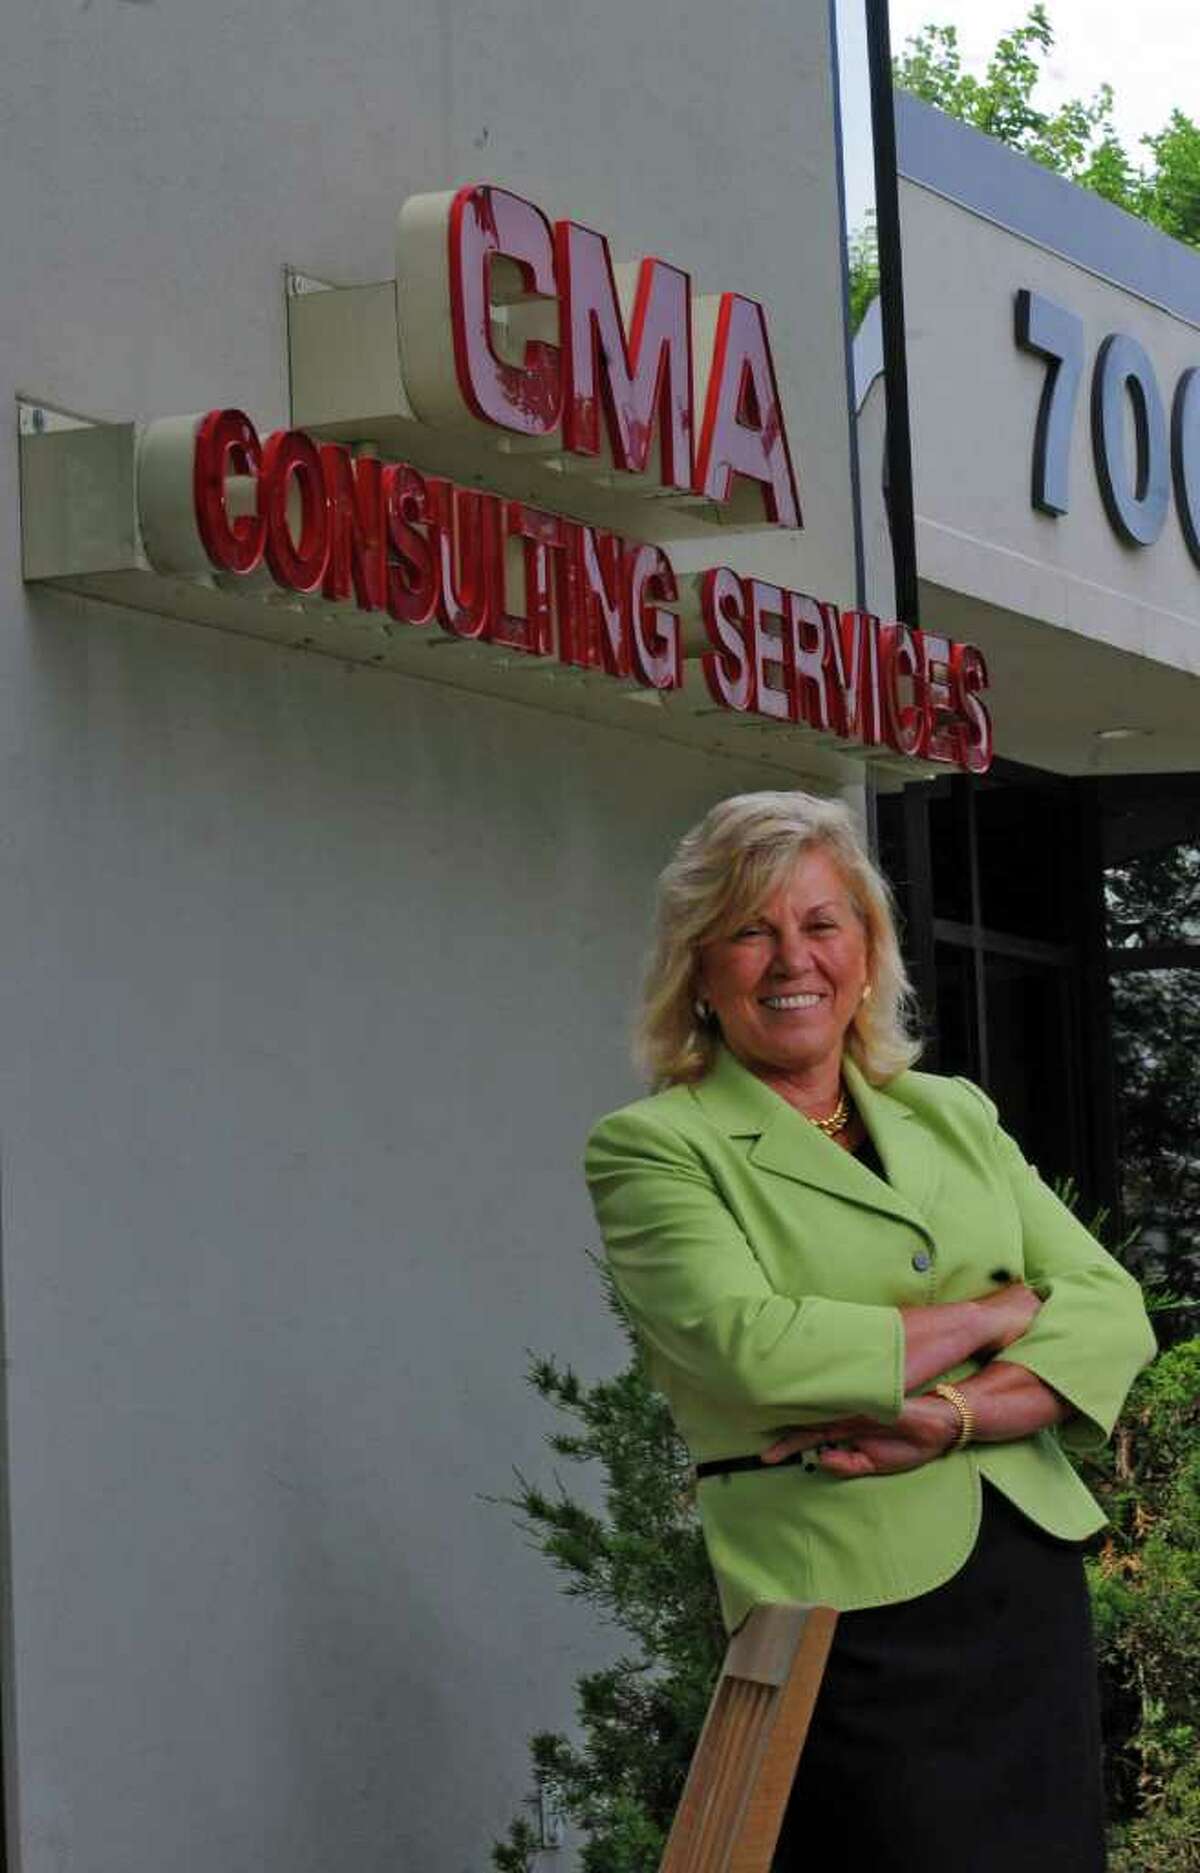 Kay Stafford, President of CMA Consulting Services, talks about her company's 25 years in business, at CMA's Latham, NY offices on Wednesday June 17, 2009. (Philip Kamrass / Times Union)